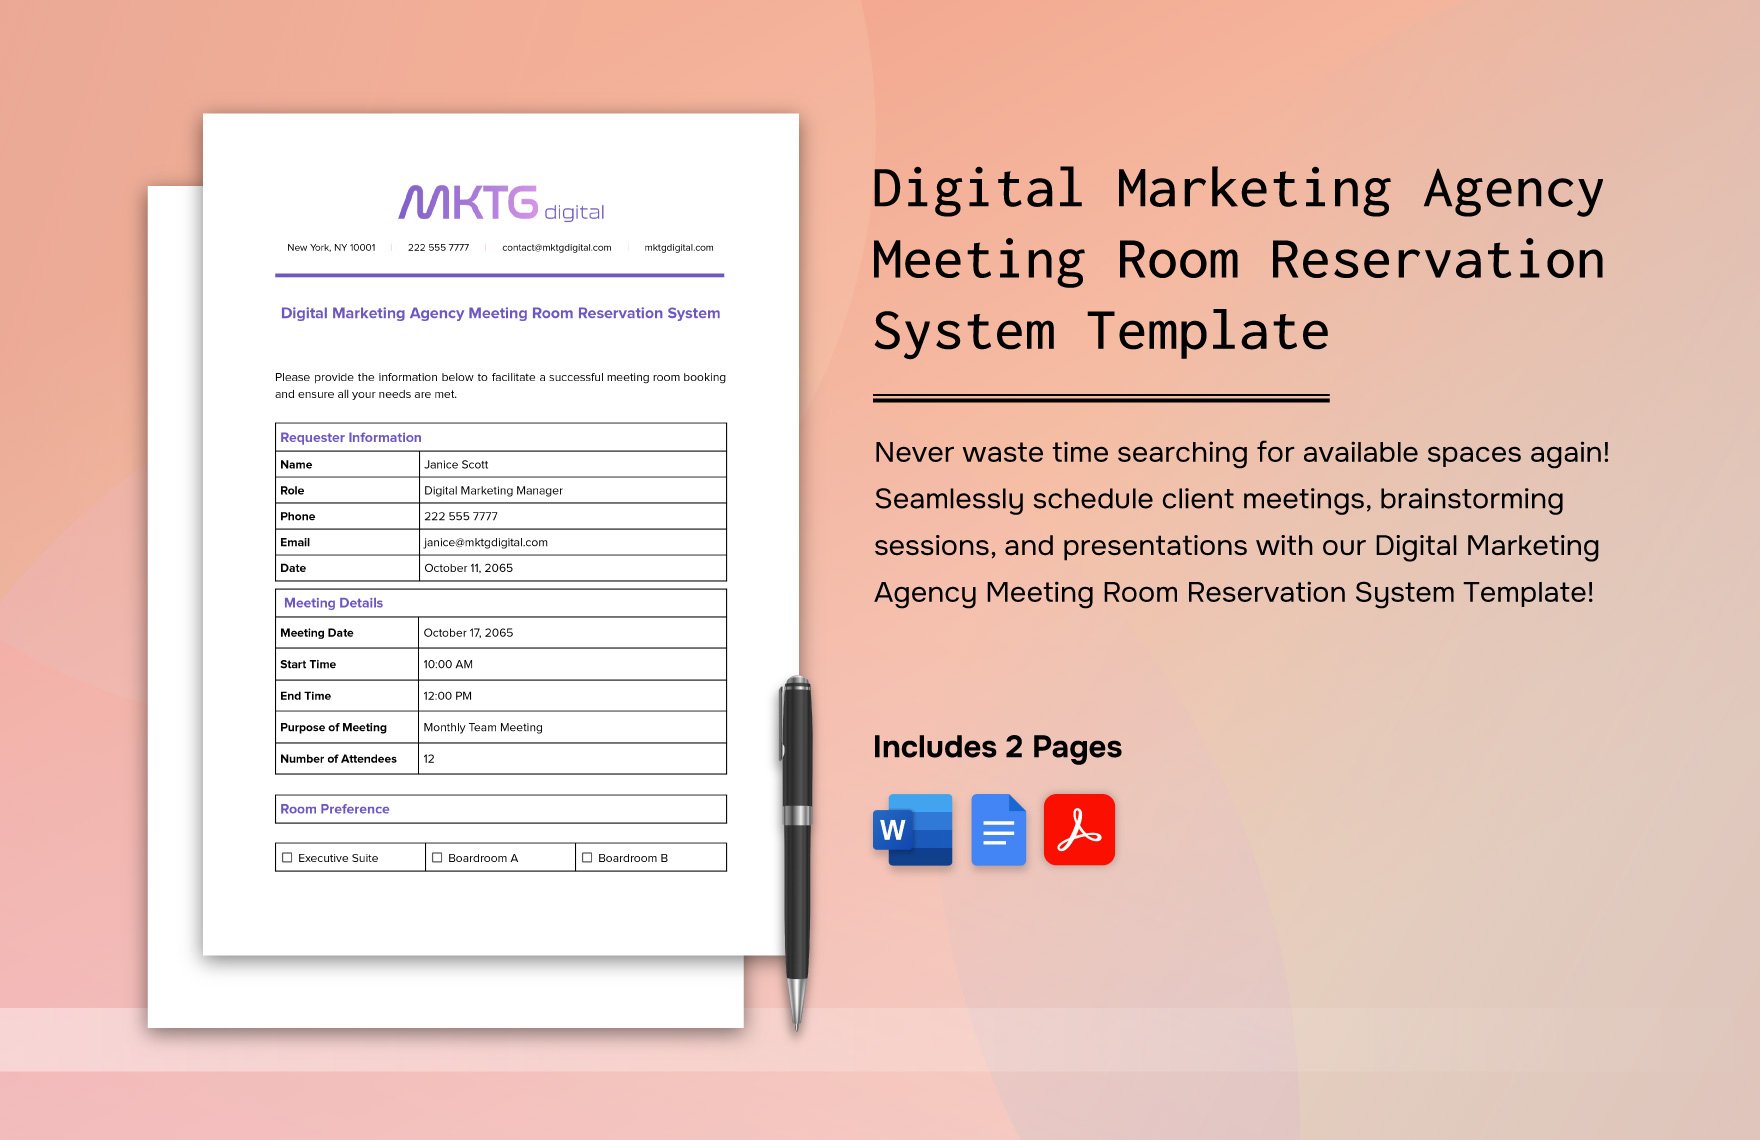 Digital Marketing Agency Meeting Room Reservation System Template 